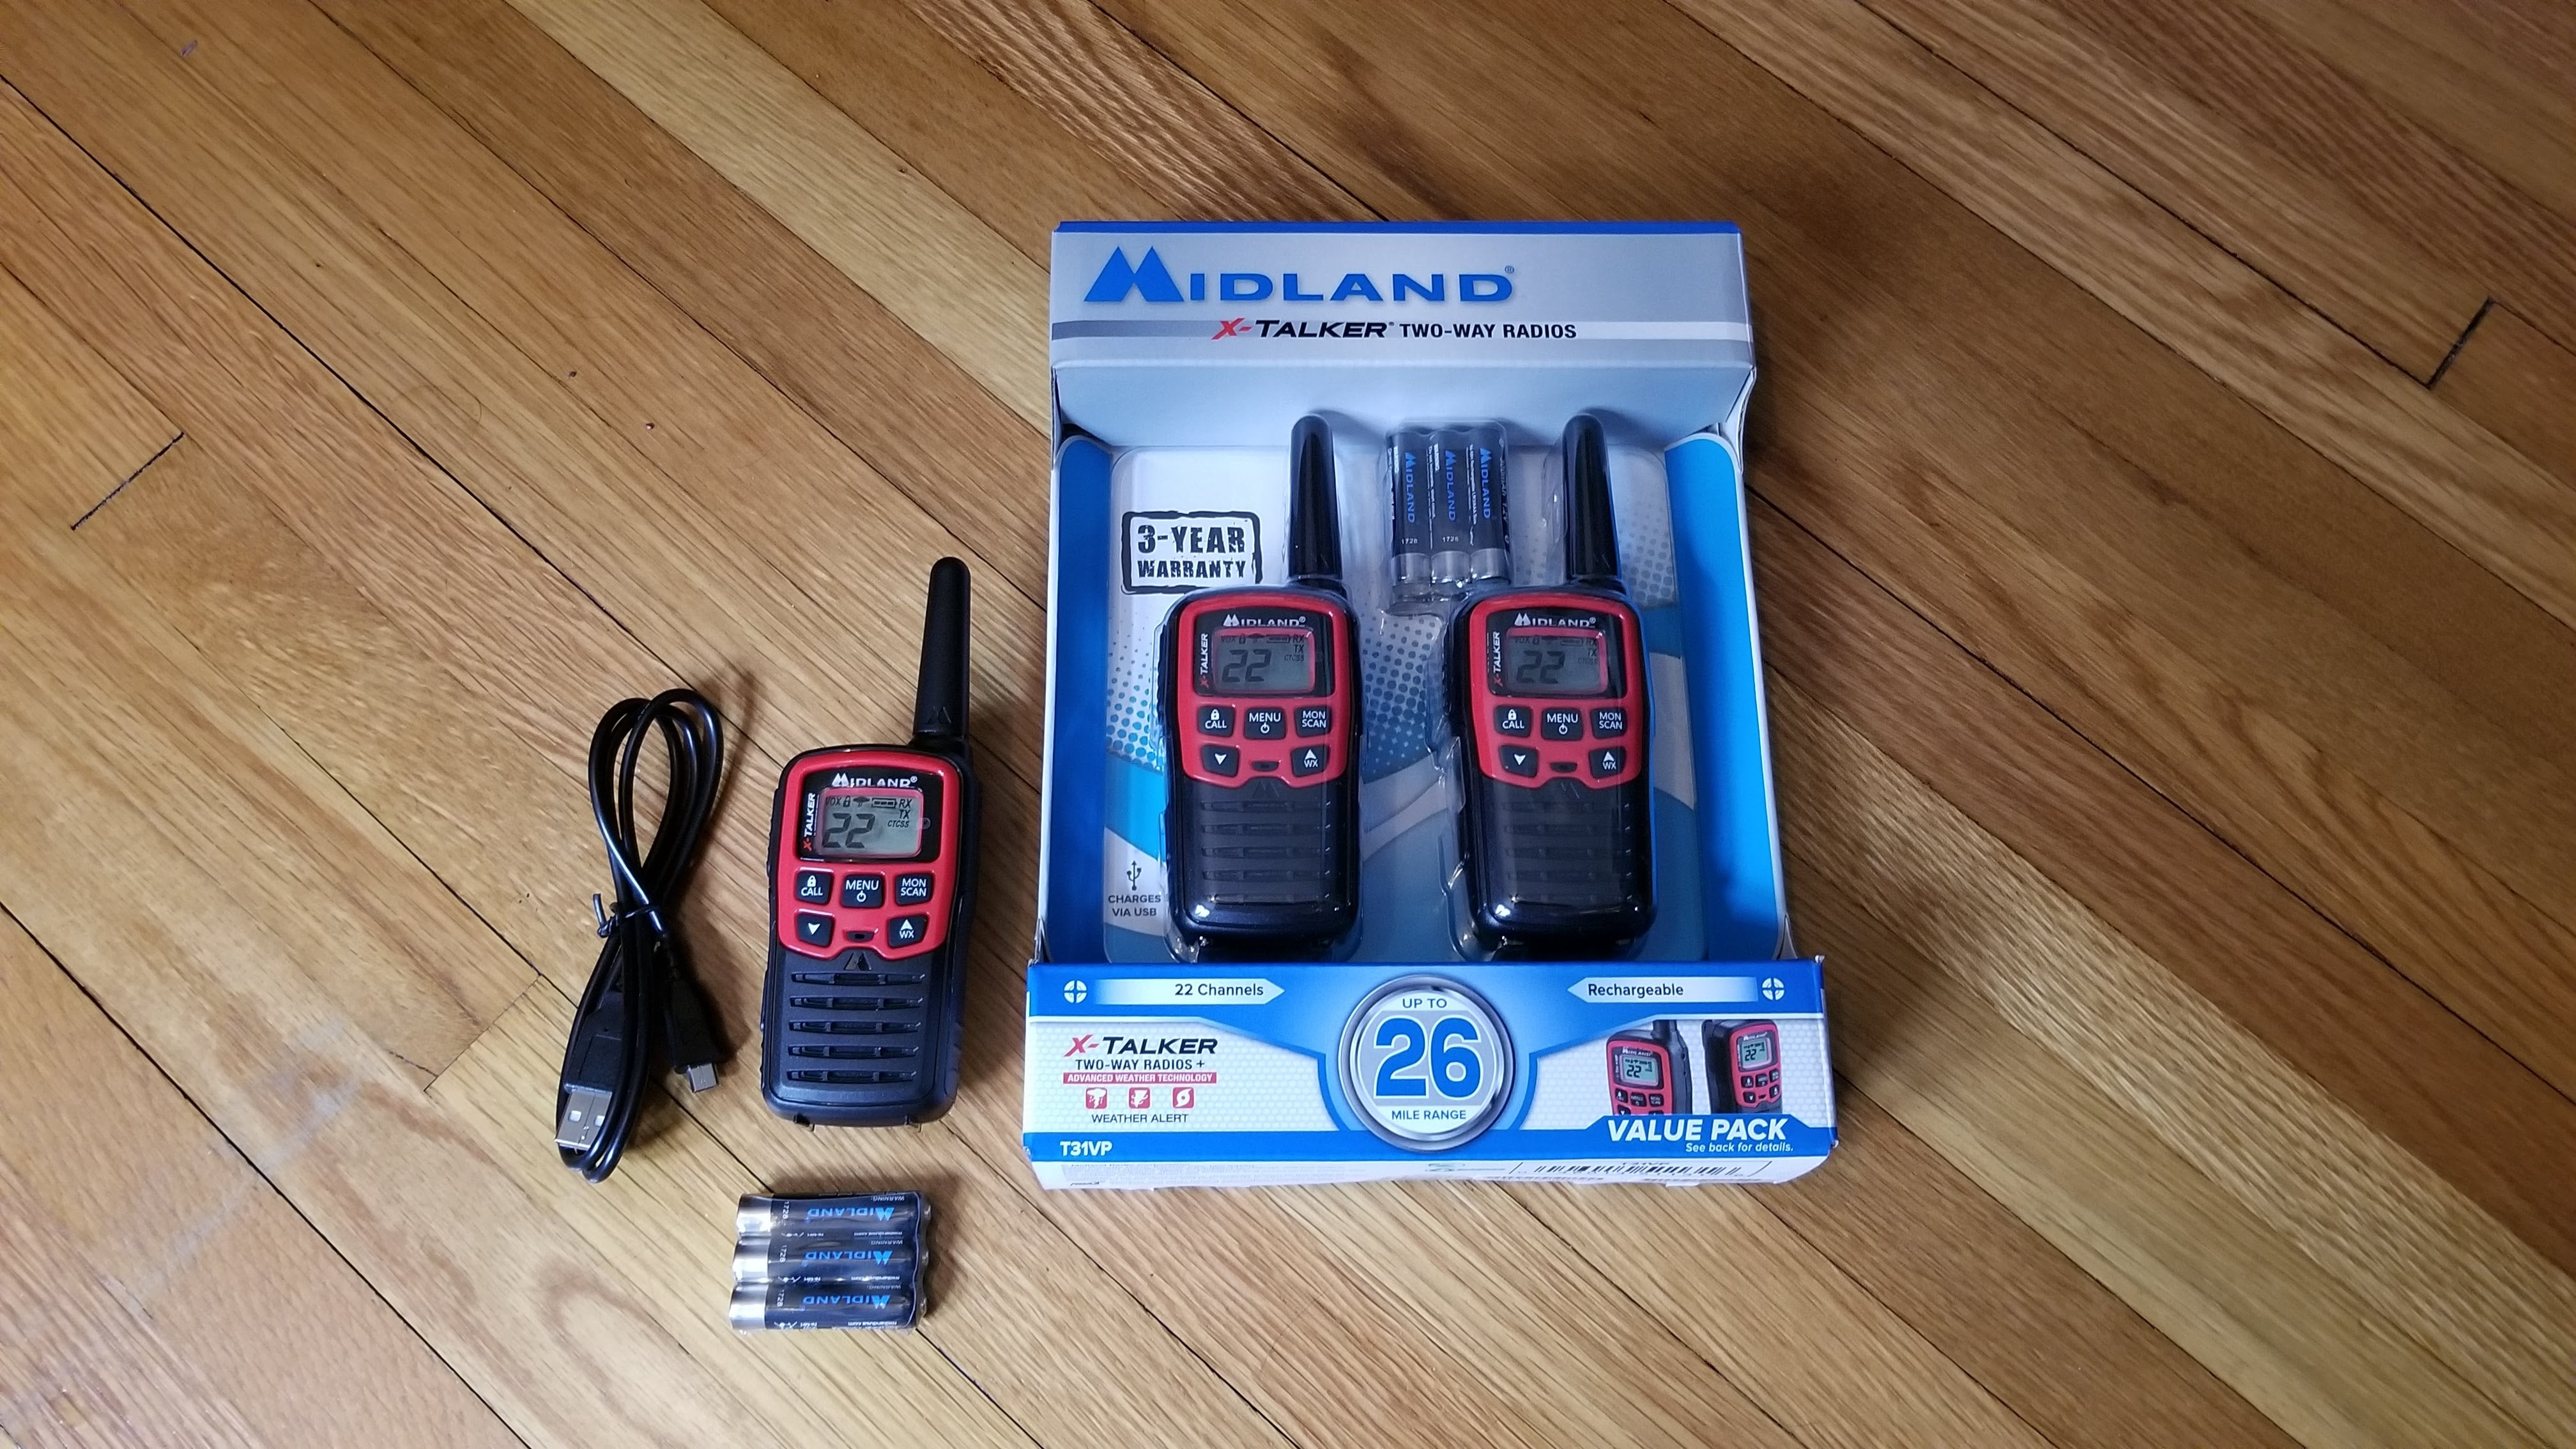 Midland X-Talker Radio 3-pack (a bit of unusual packaging for the 3-pack).